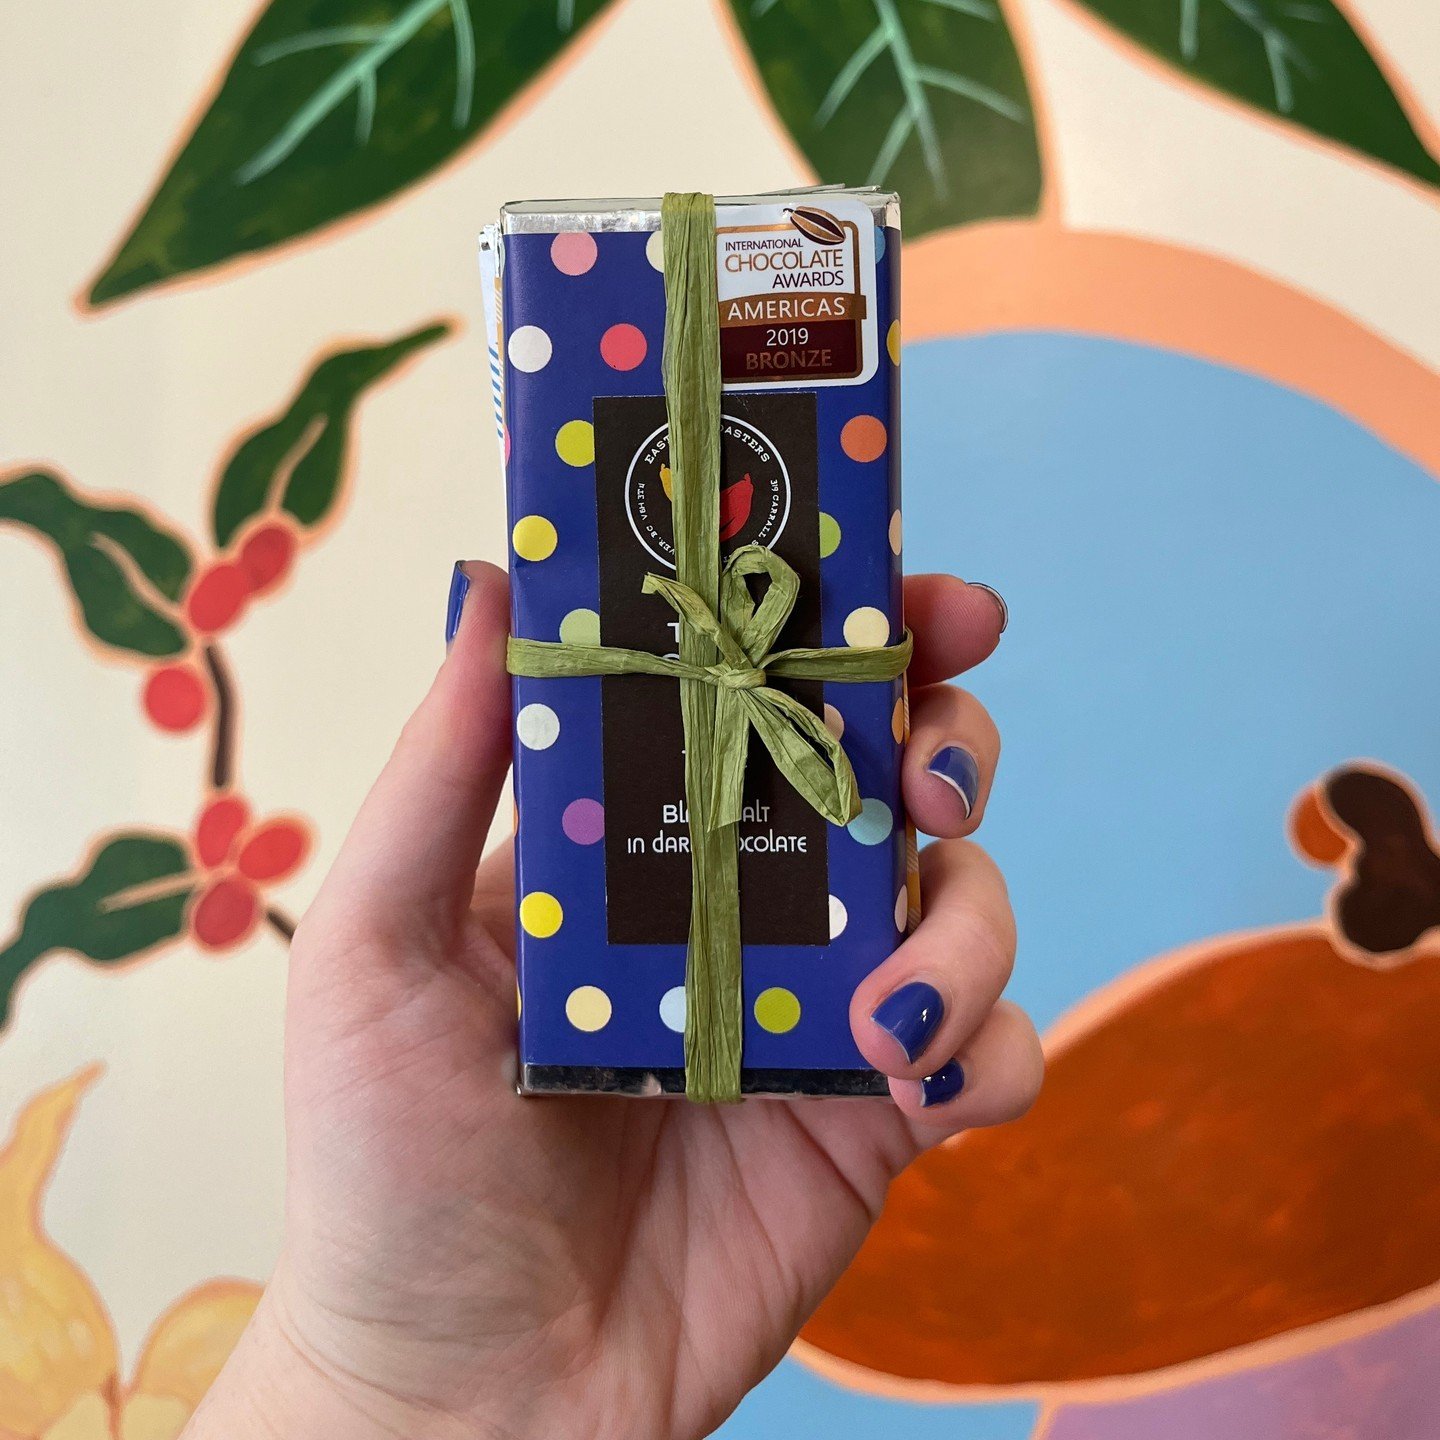 Did you know we wrap our bars in-house? We love choosing fun designs to catch your eye!

Visit East Van Roasters from Tuesday to Saturday, 10-5, to choose from a selection of yummy chocolate bars, with flavours ranging from Cashew Raising Bar to Toff